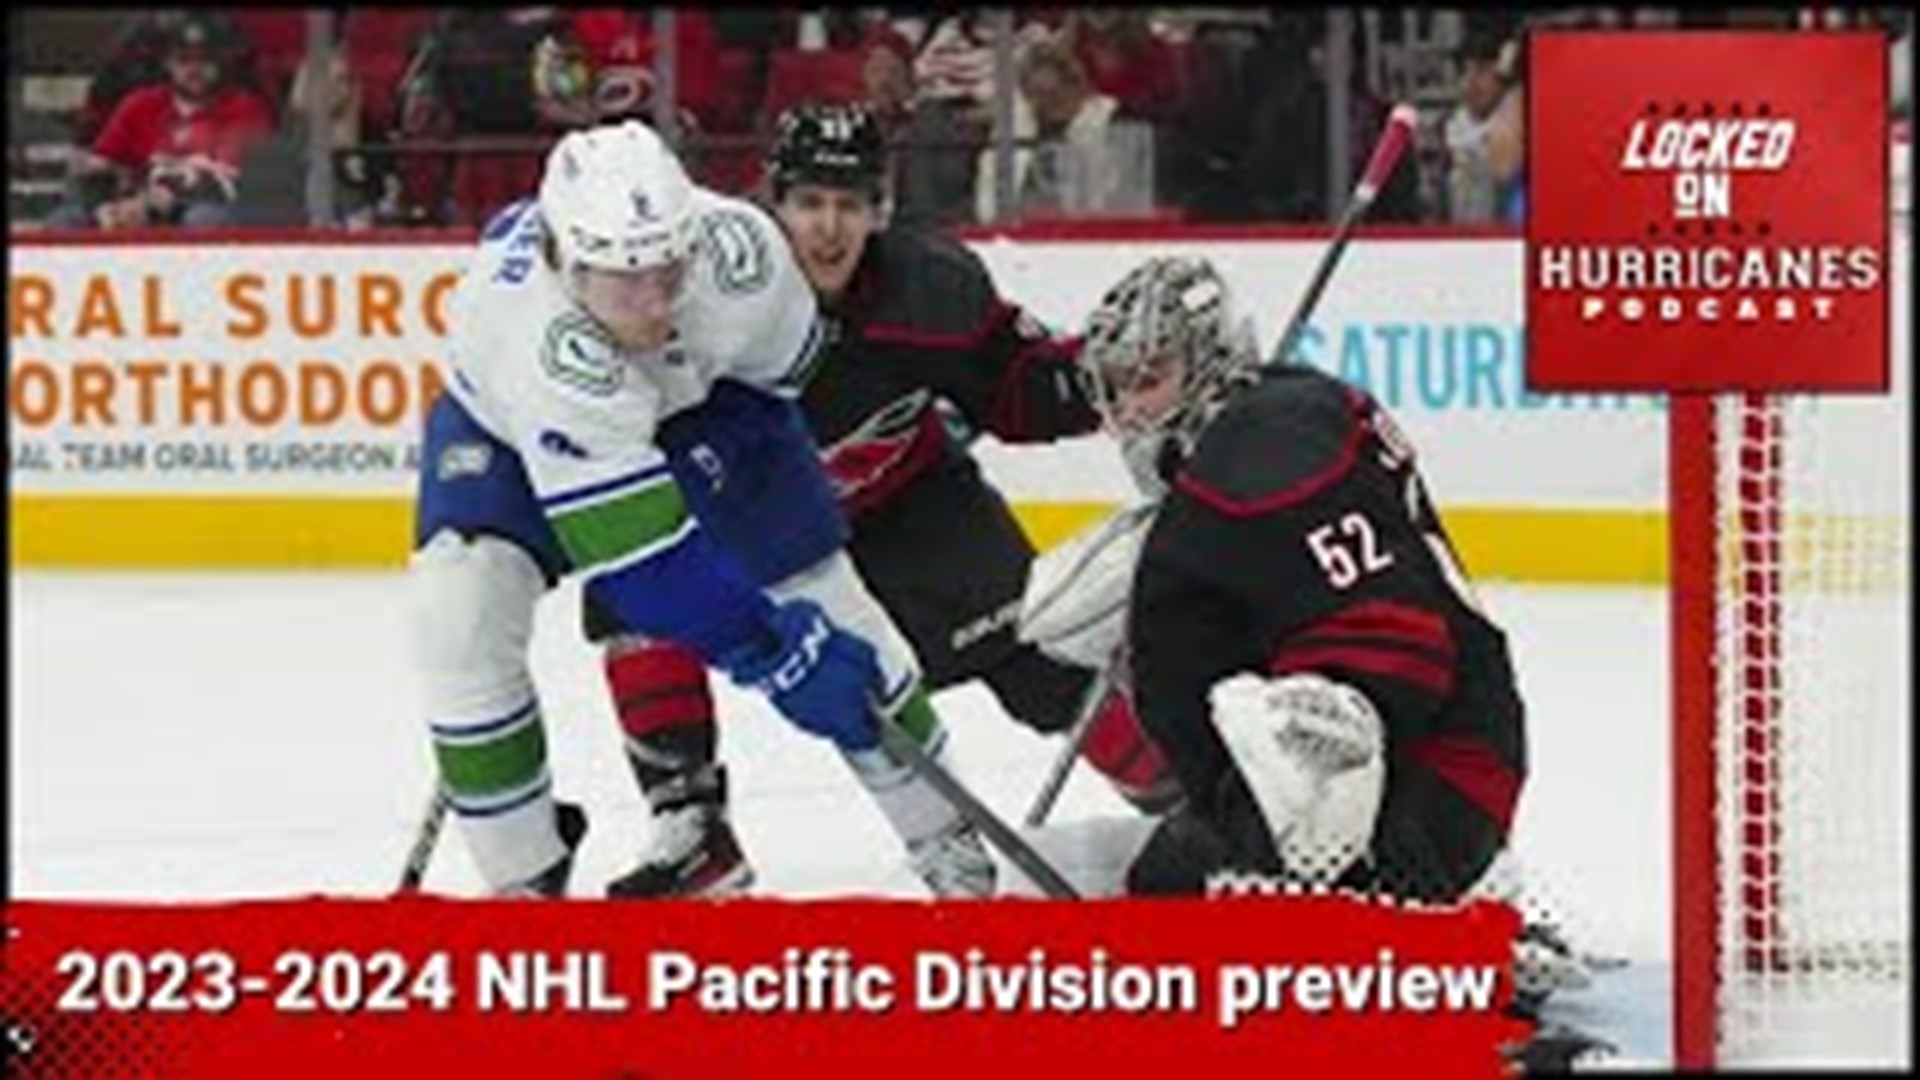 We wrap up the Western Conference in our NHL season preview by looking at the Pacific Division.  That and more on Locked On Hurricanes.